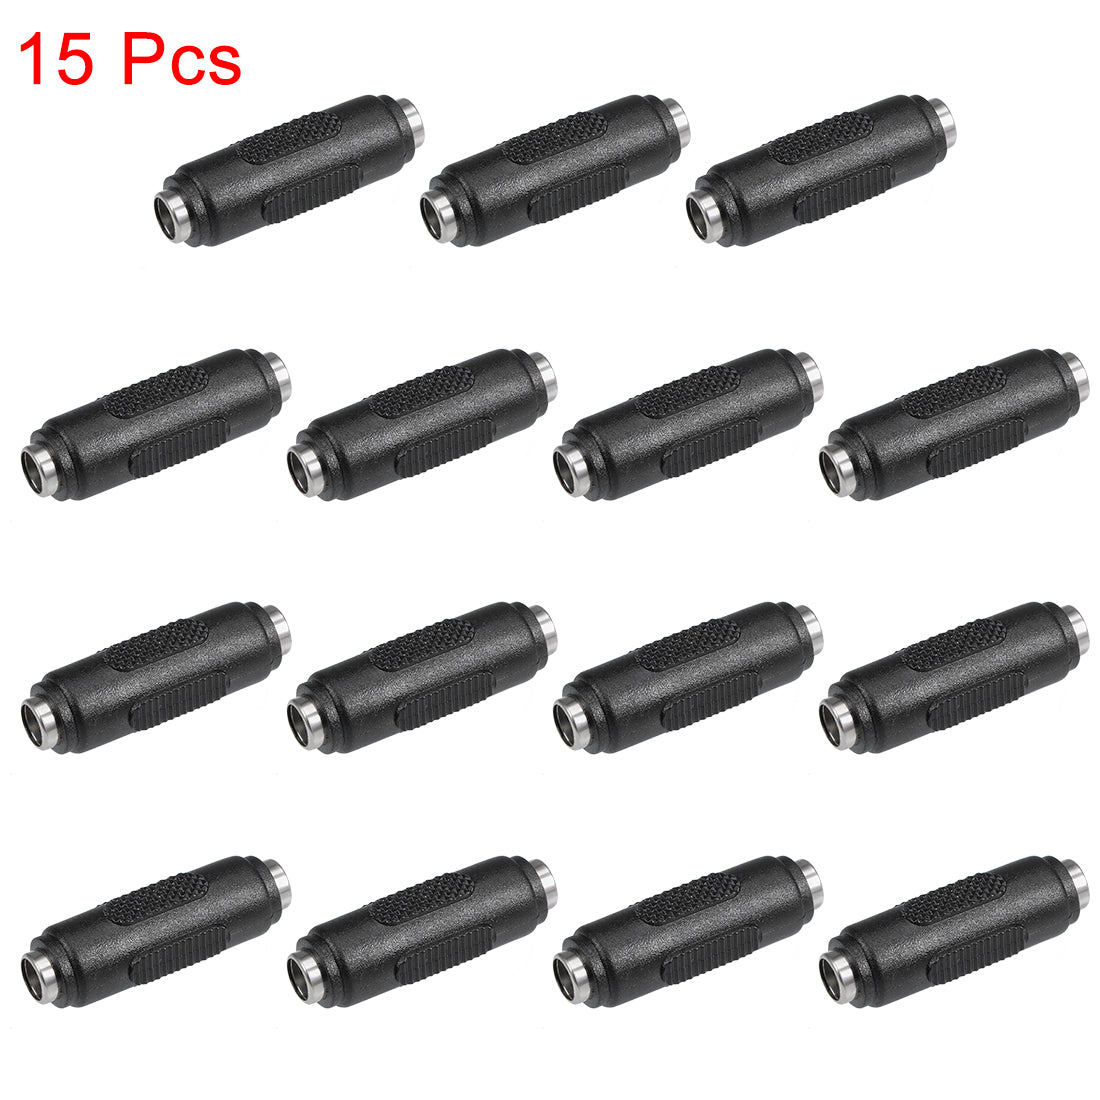 uxcell Uxcell 15Pcs DC Female to Female Connector 5.5mm x 2.1mm Power Cable Jack Adapter Black